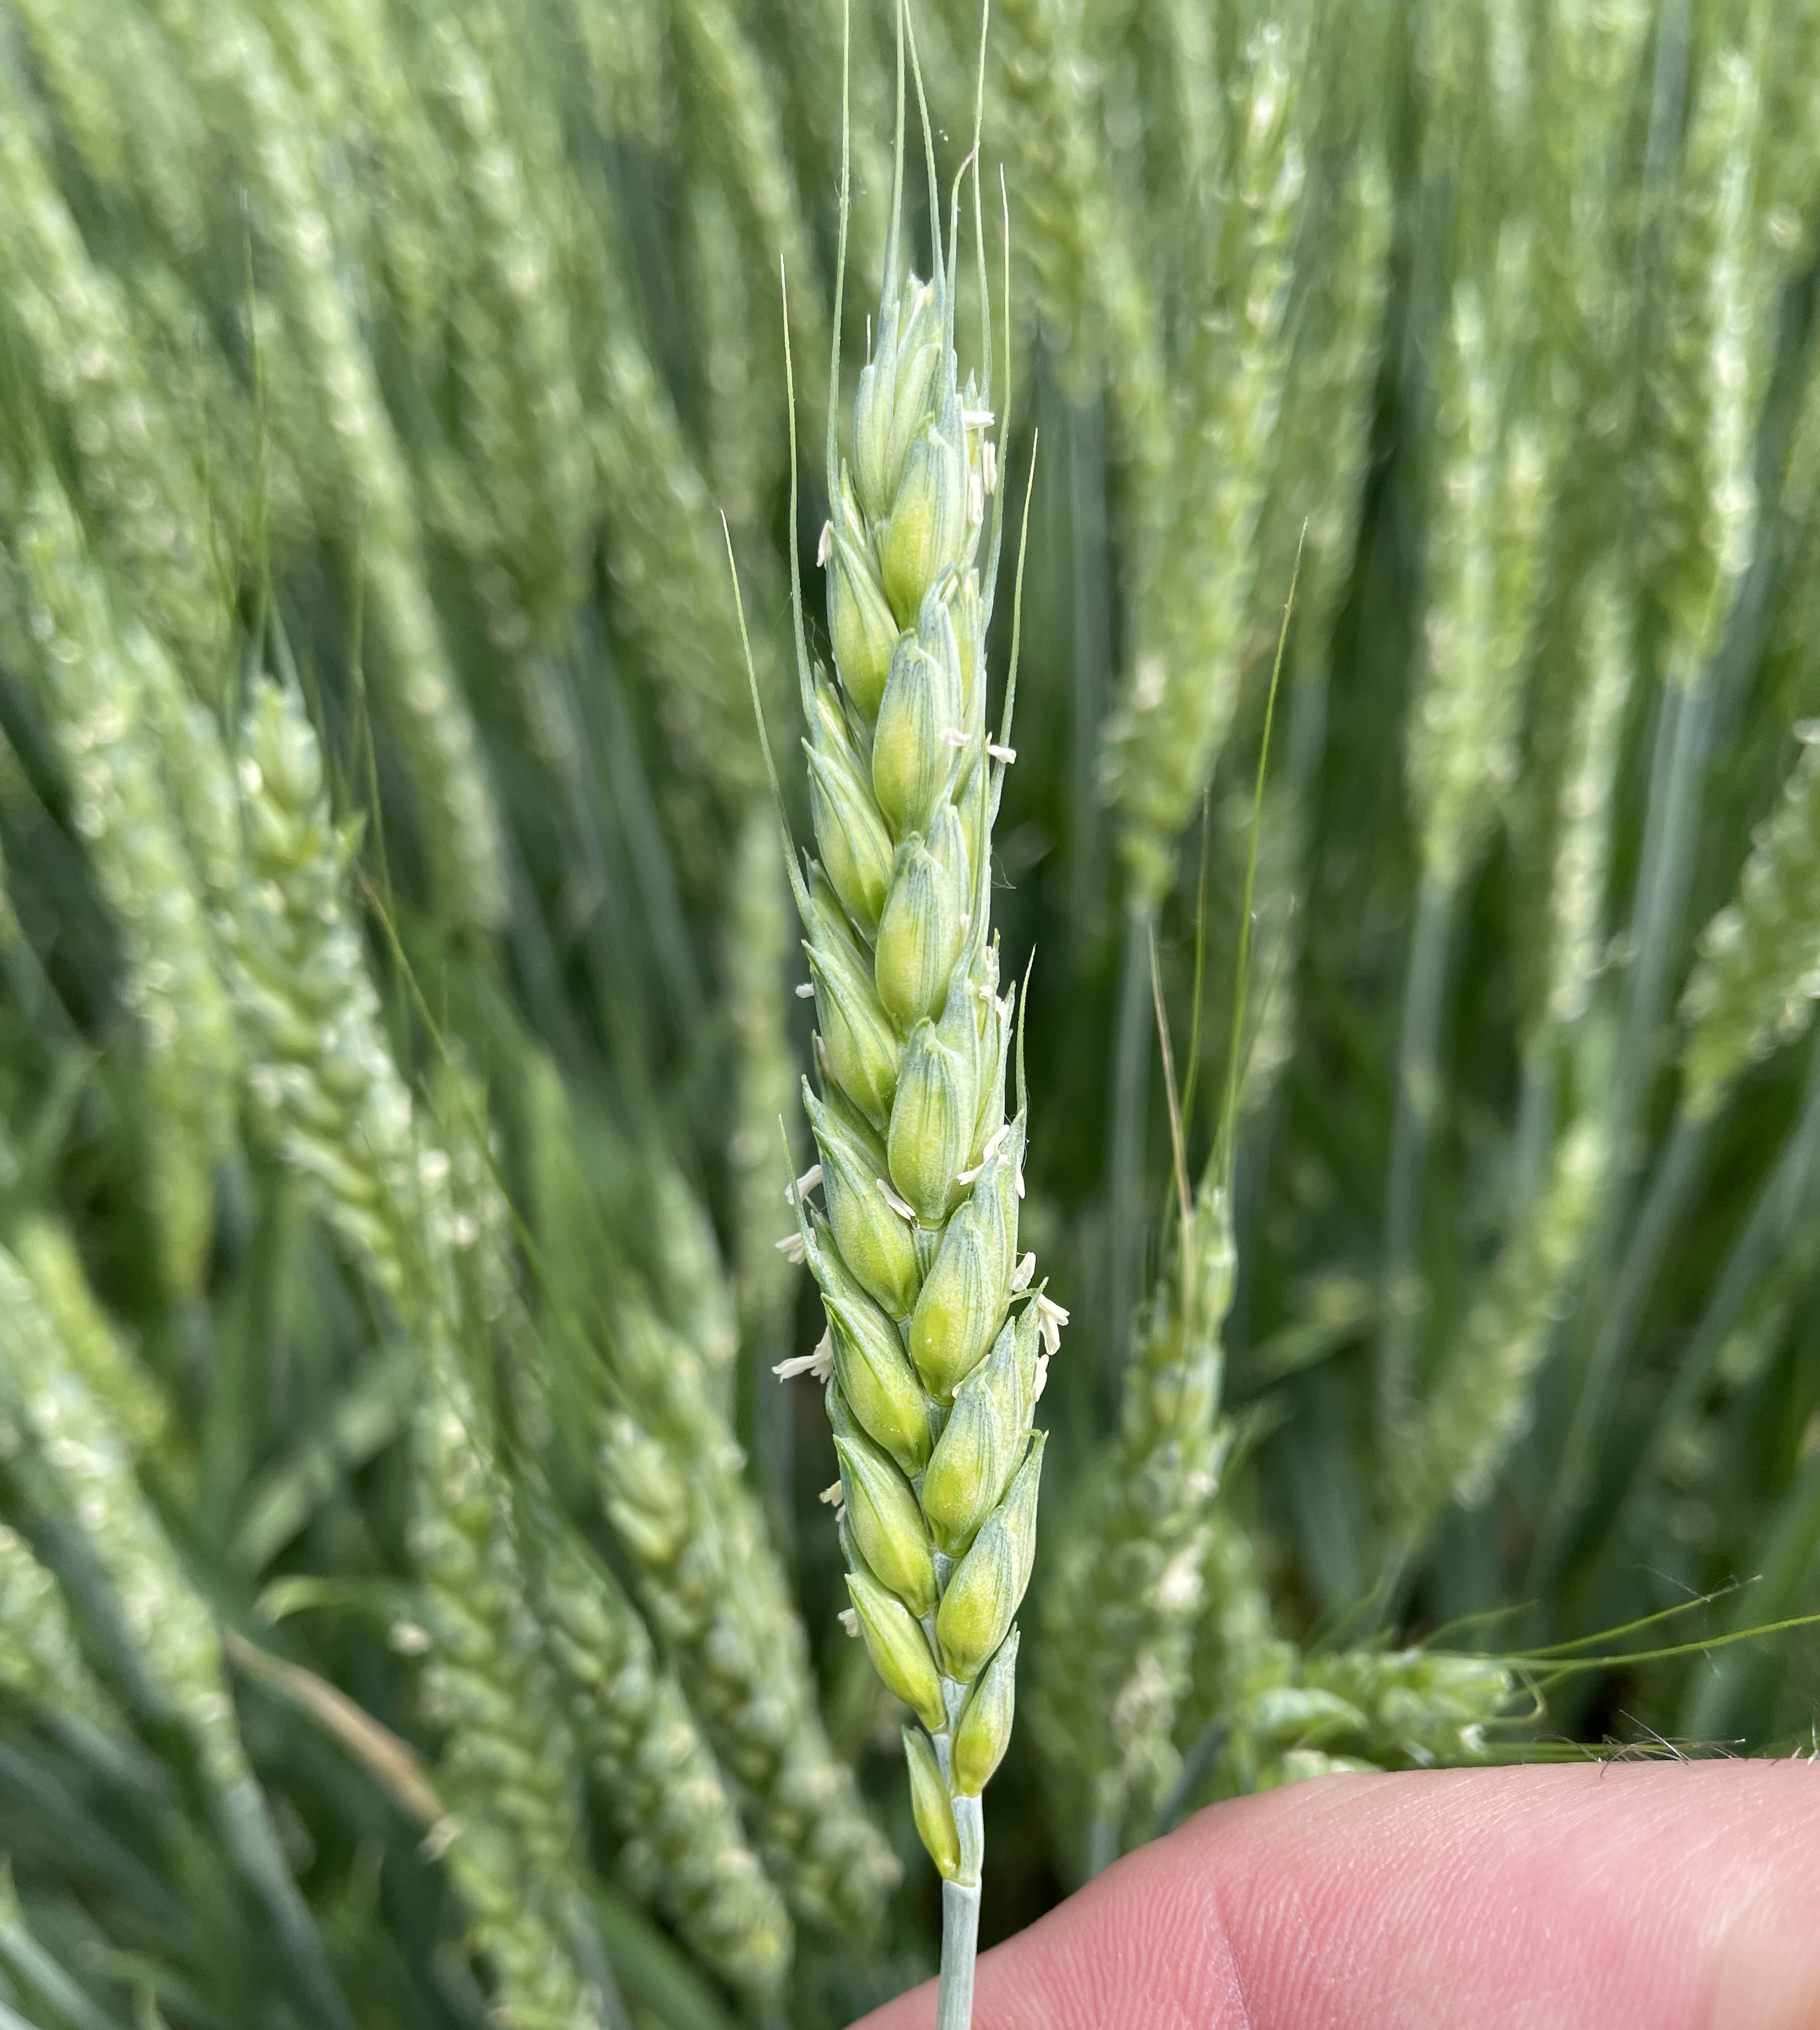 Wheat at feekes 10.5.3 stage